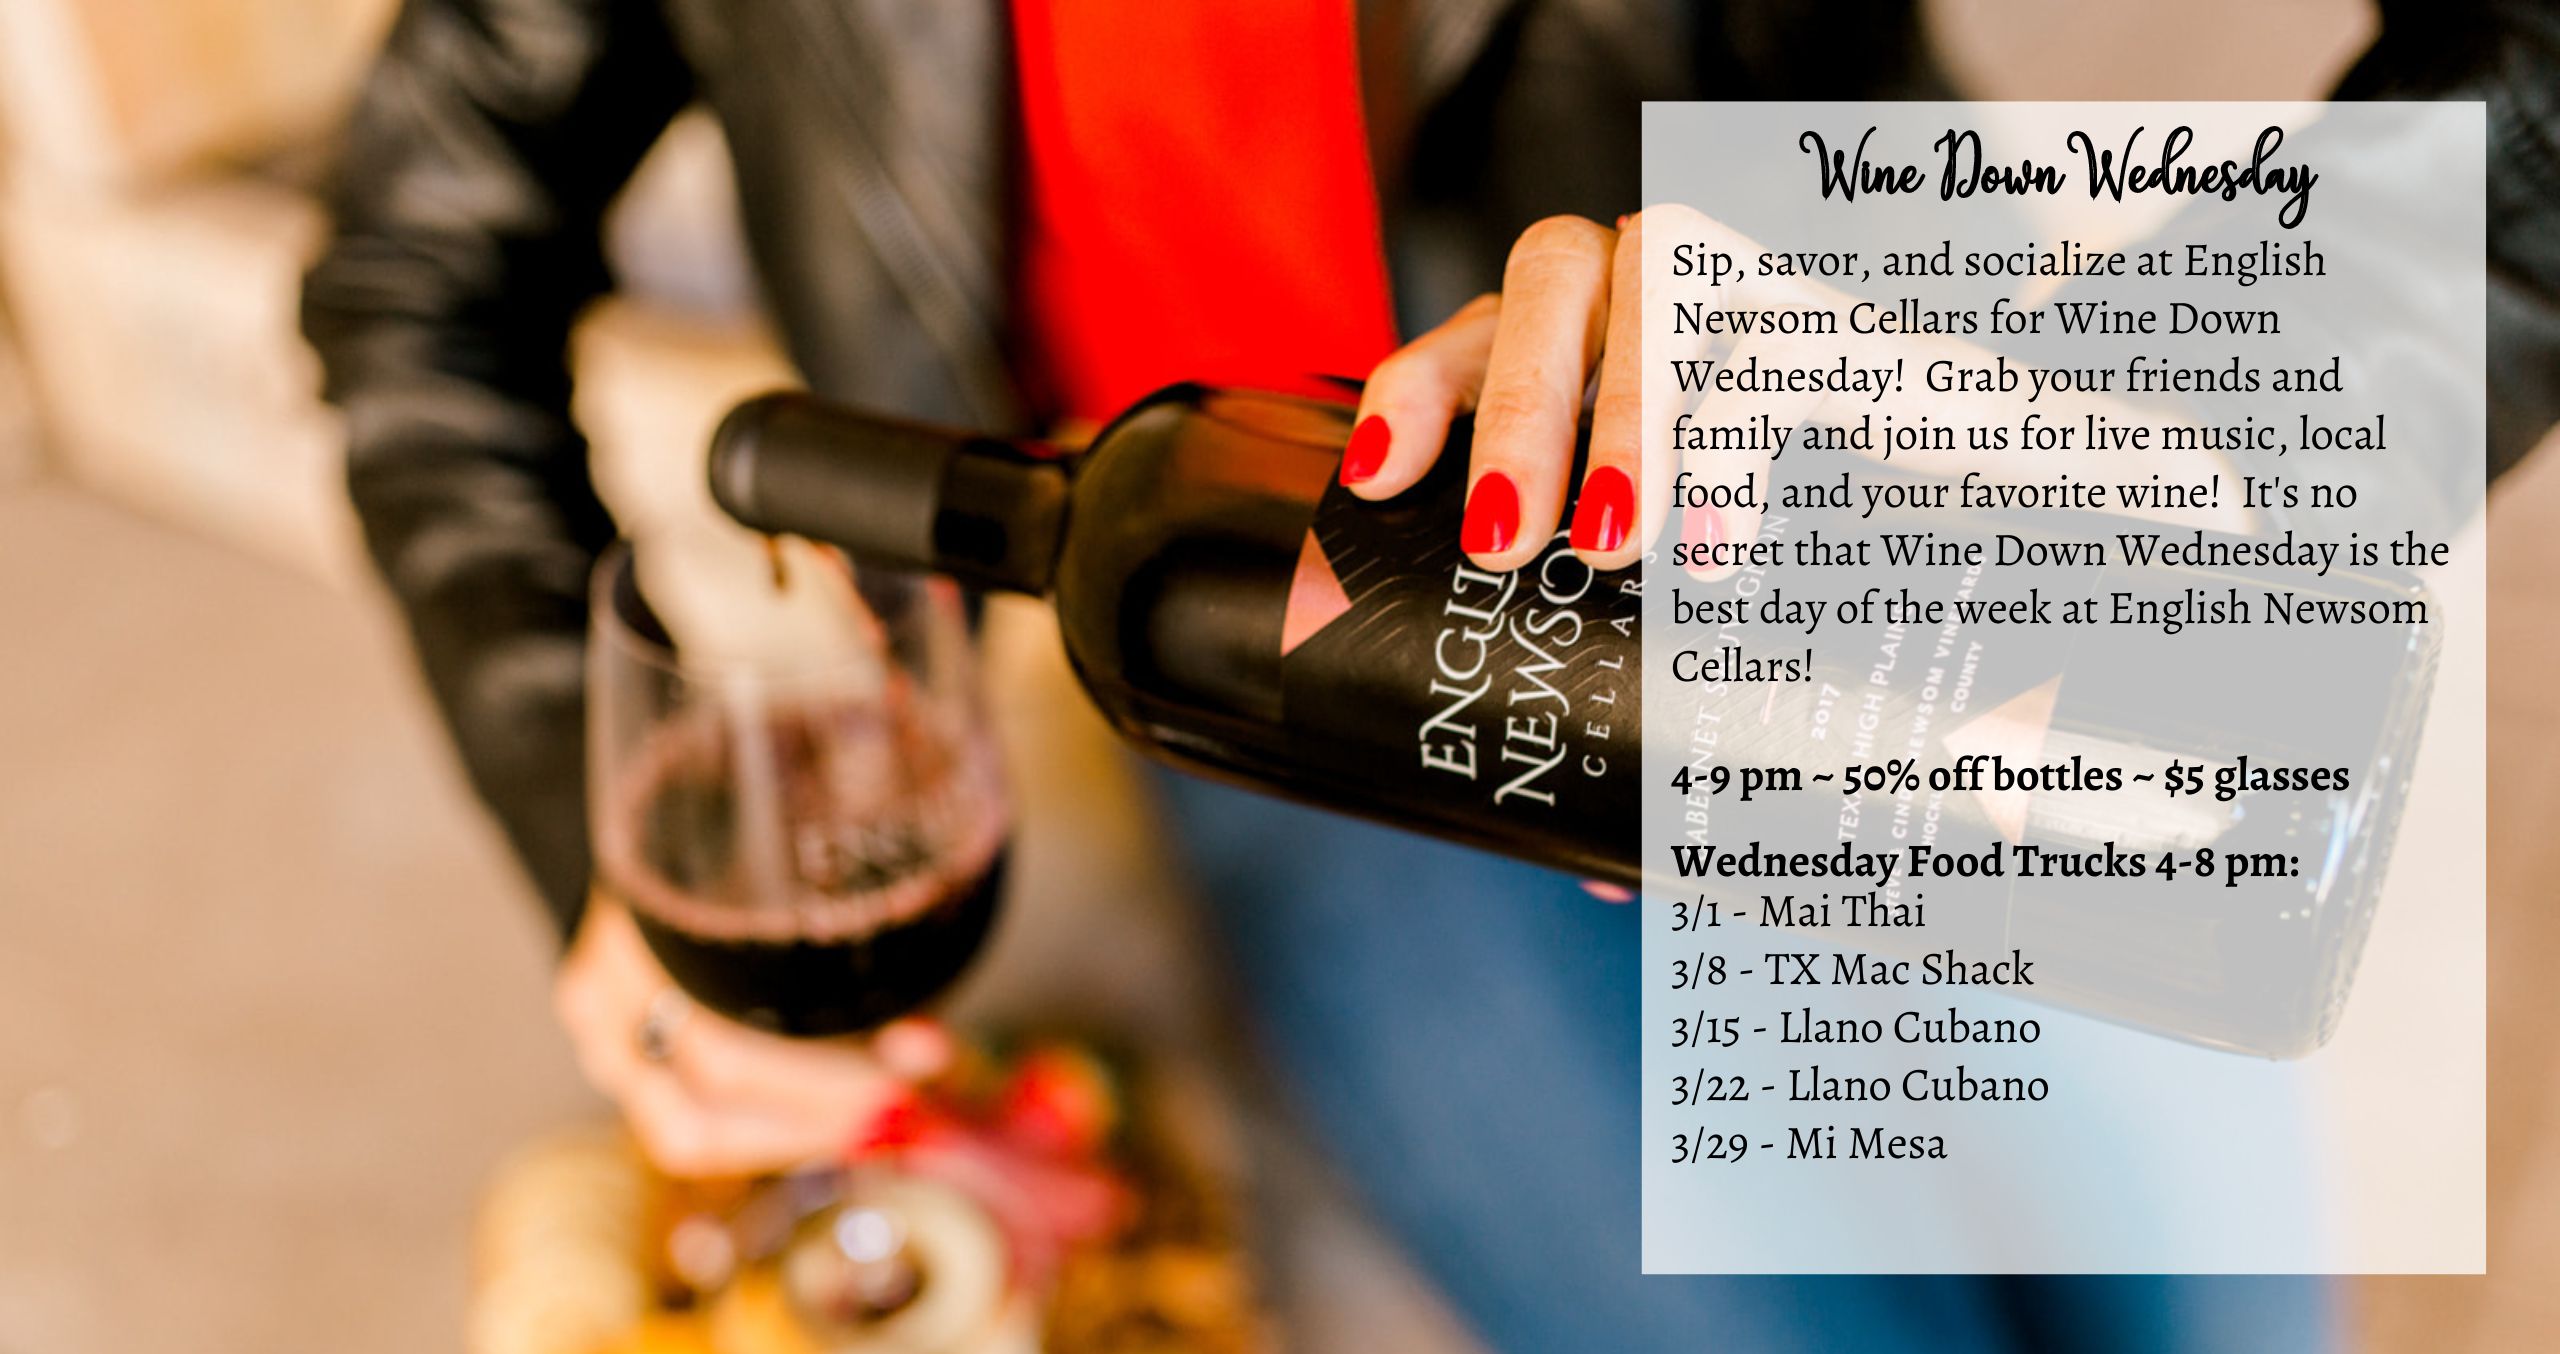 Wine Down Wednesday details for March